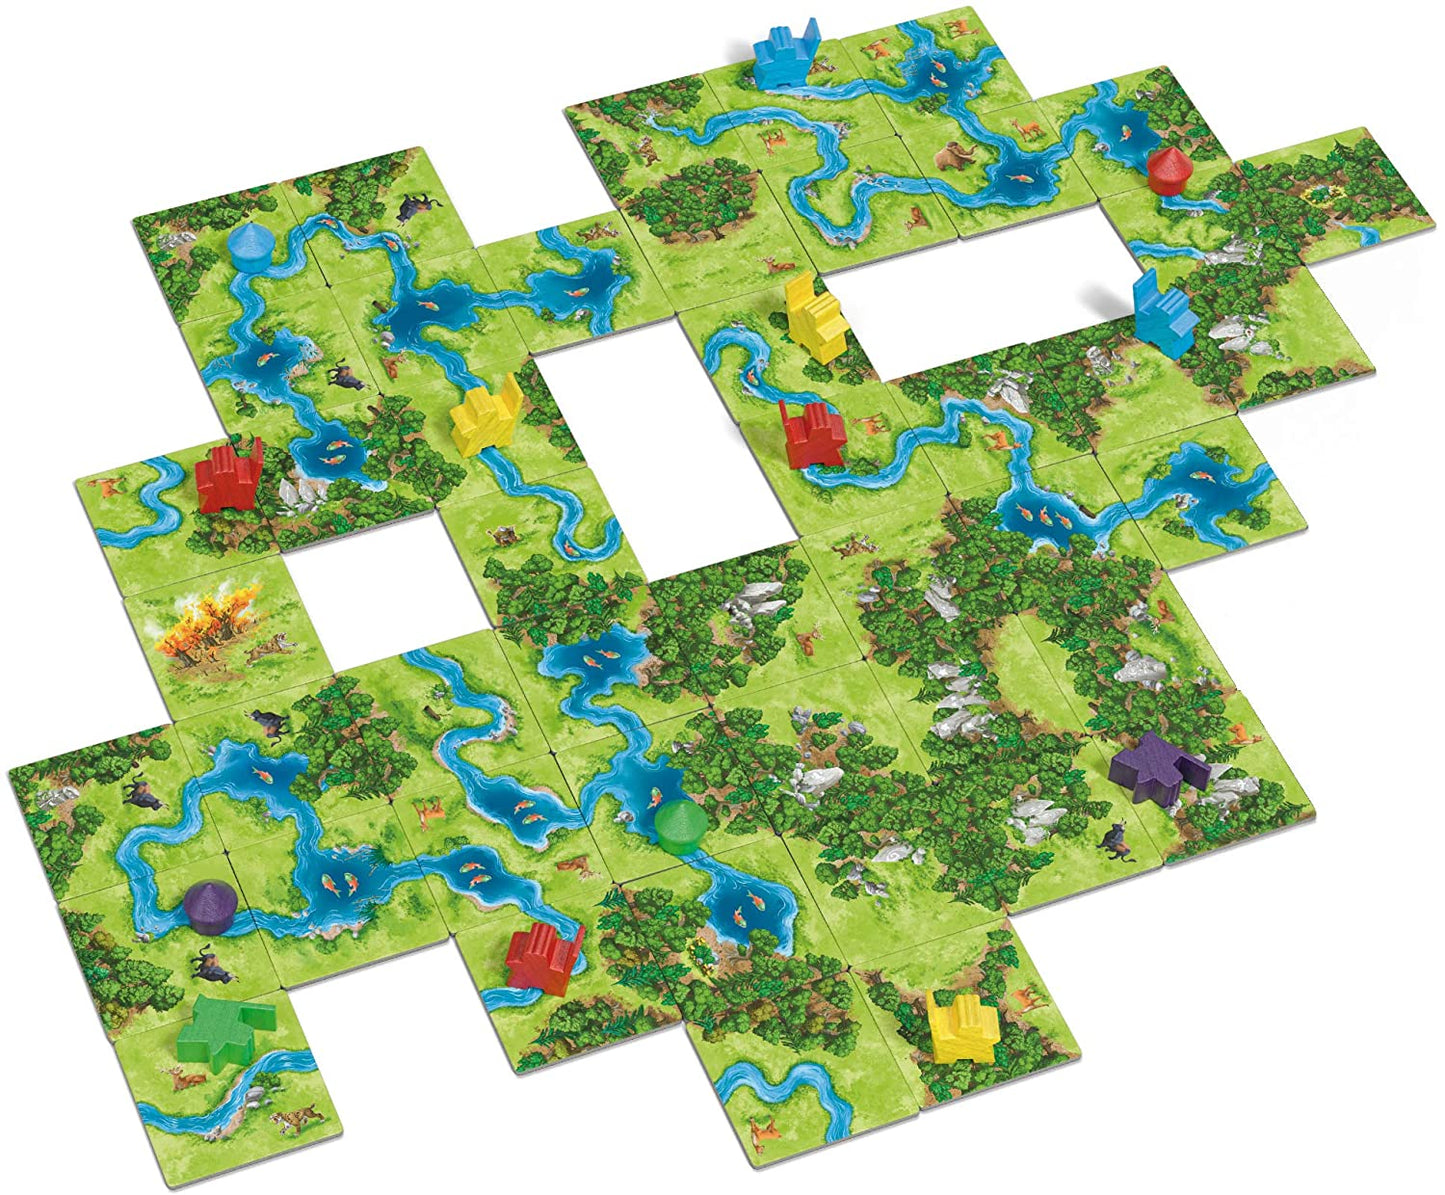 Carcassonne: Hunters and Gatherers (2020) Z-Man Games